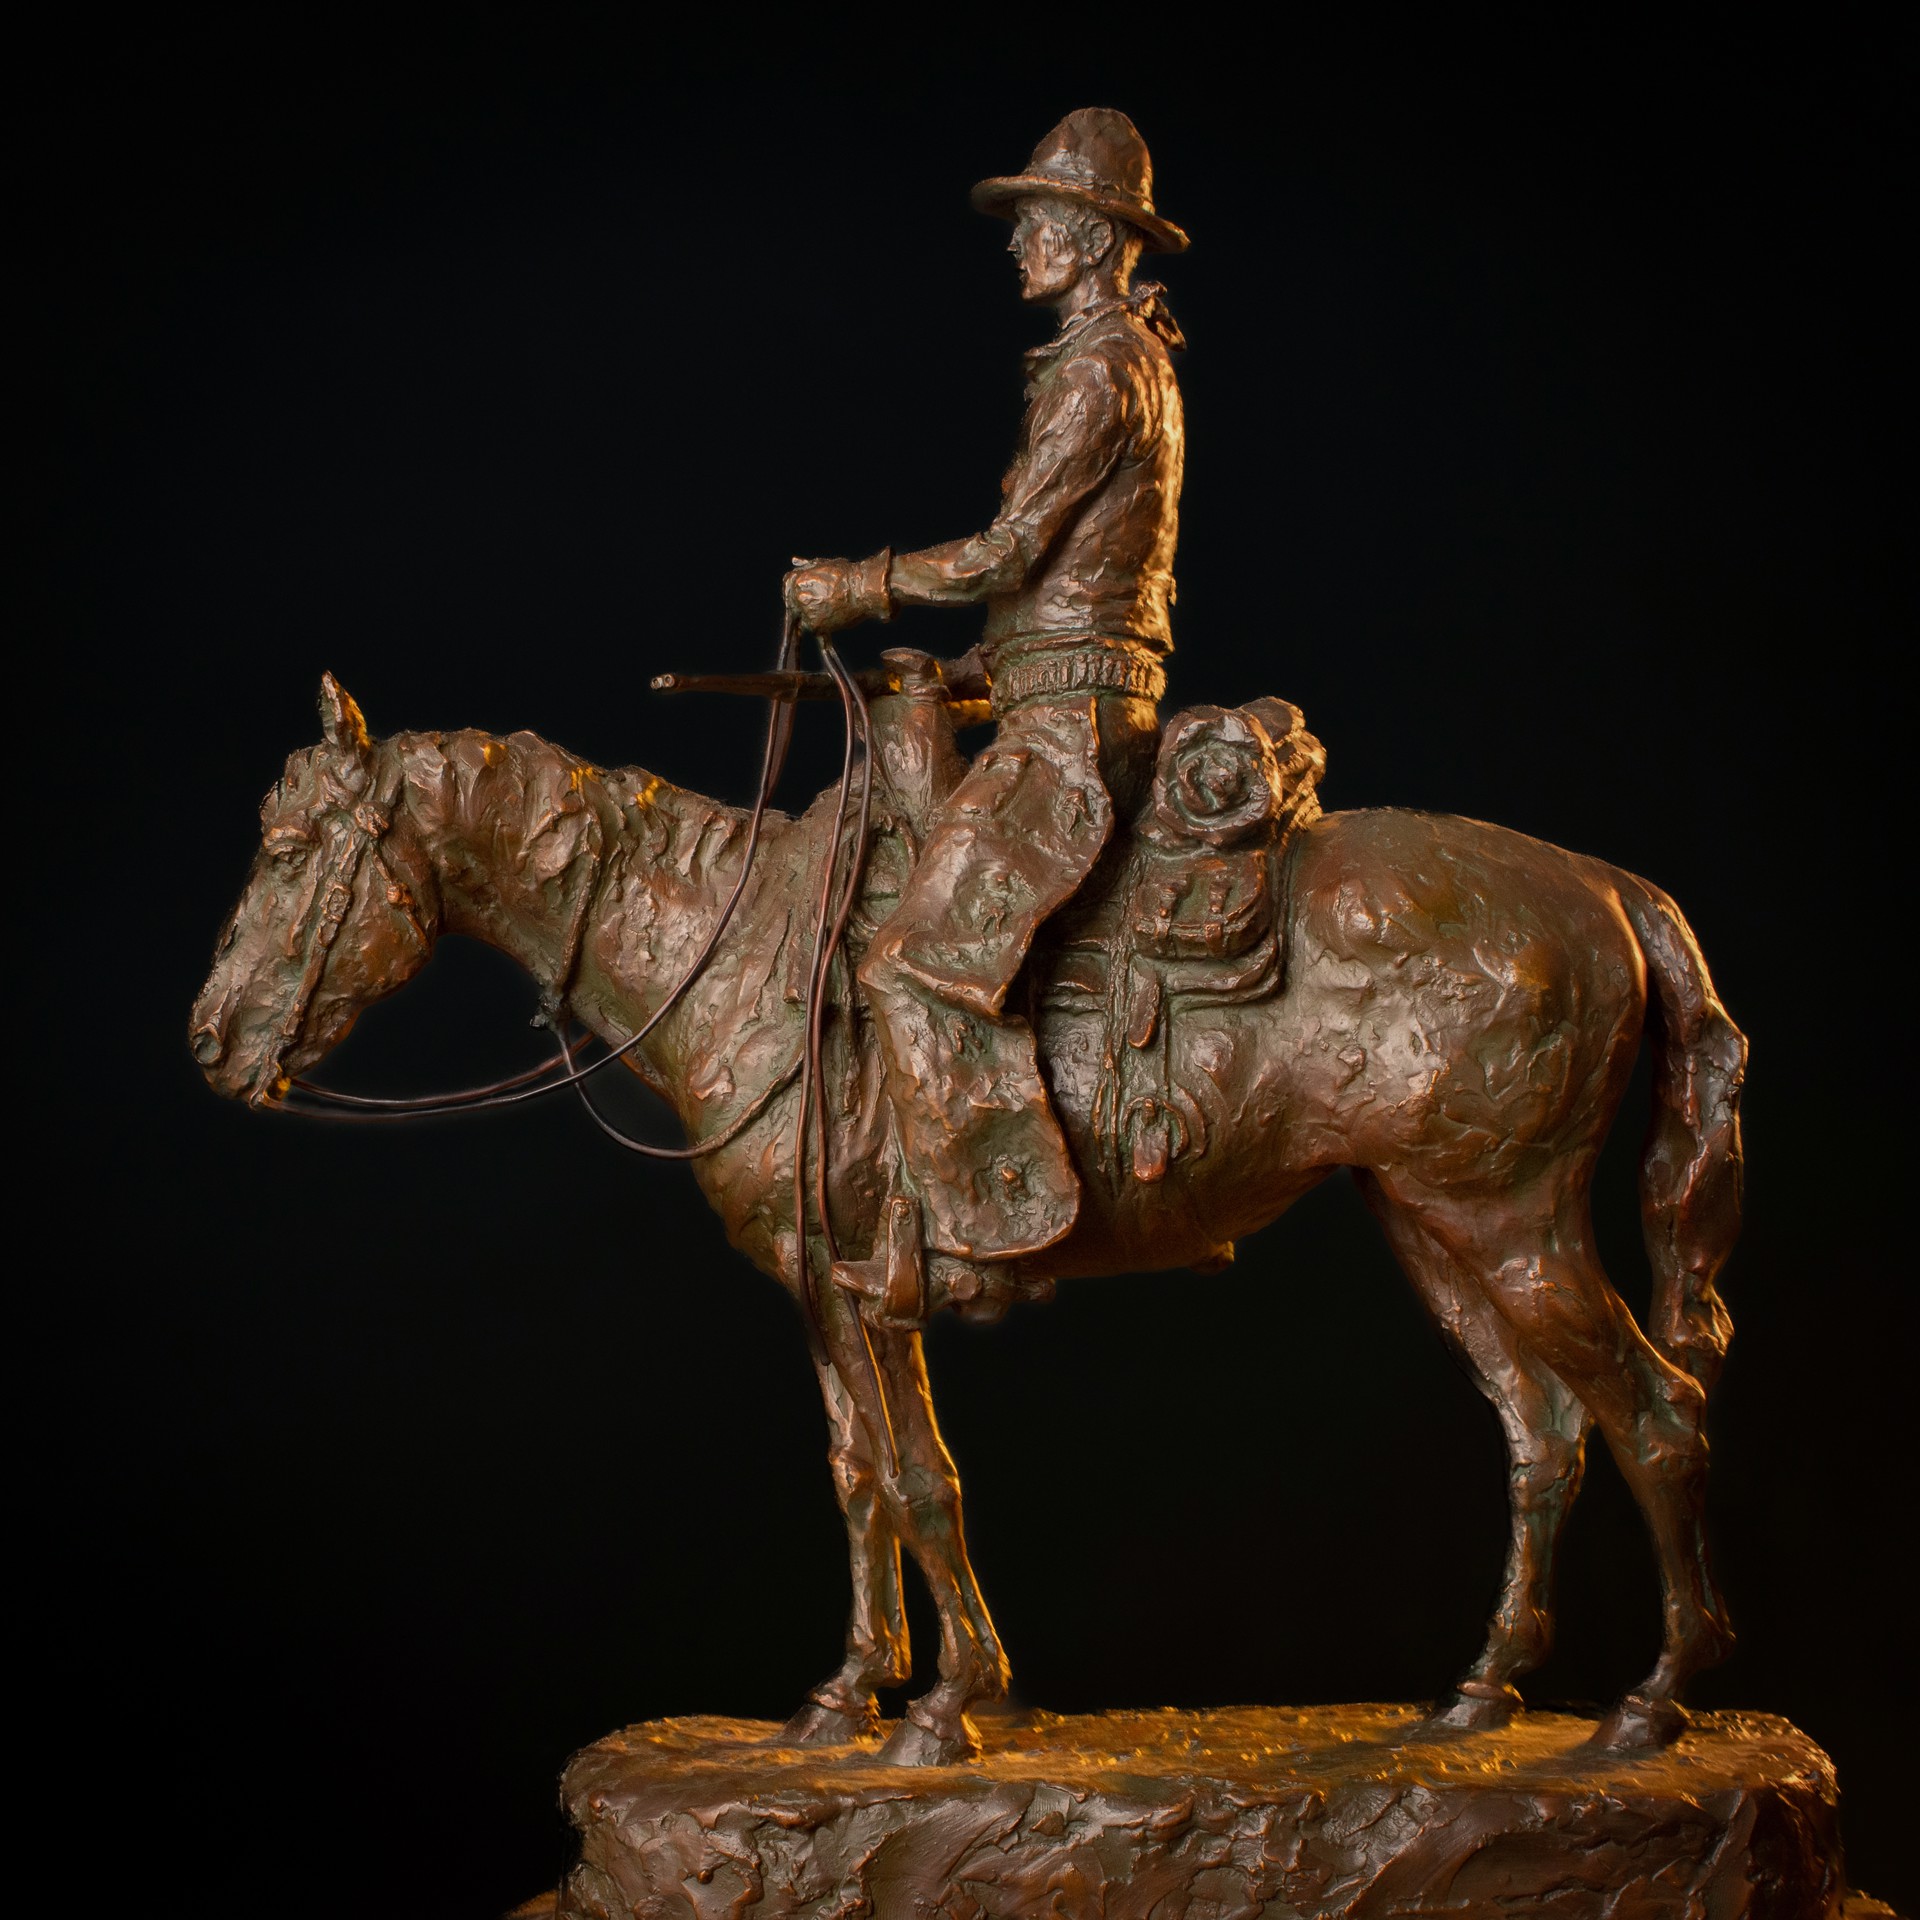 Trail Boss Maquette (Edition of 30) by Scott Rogers